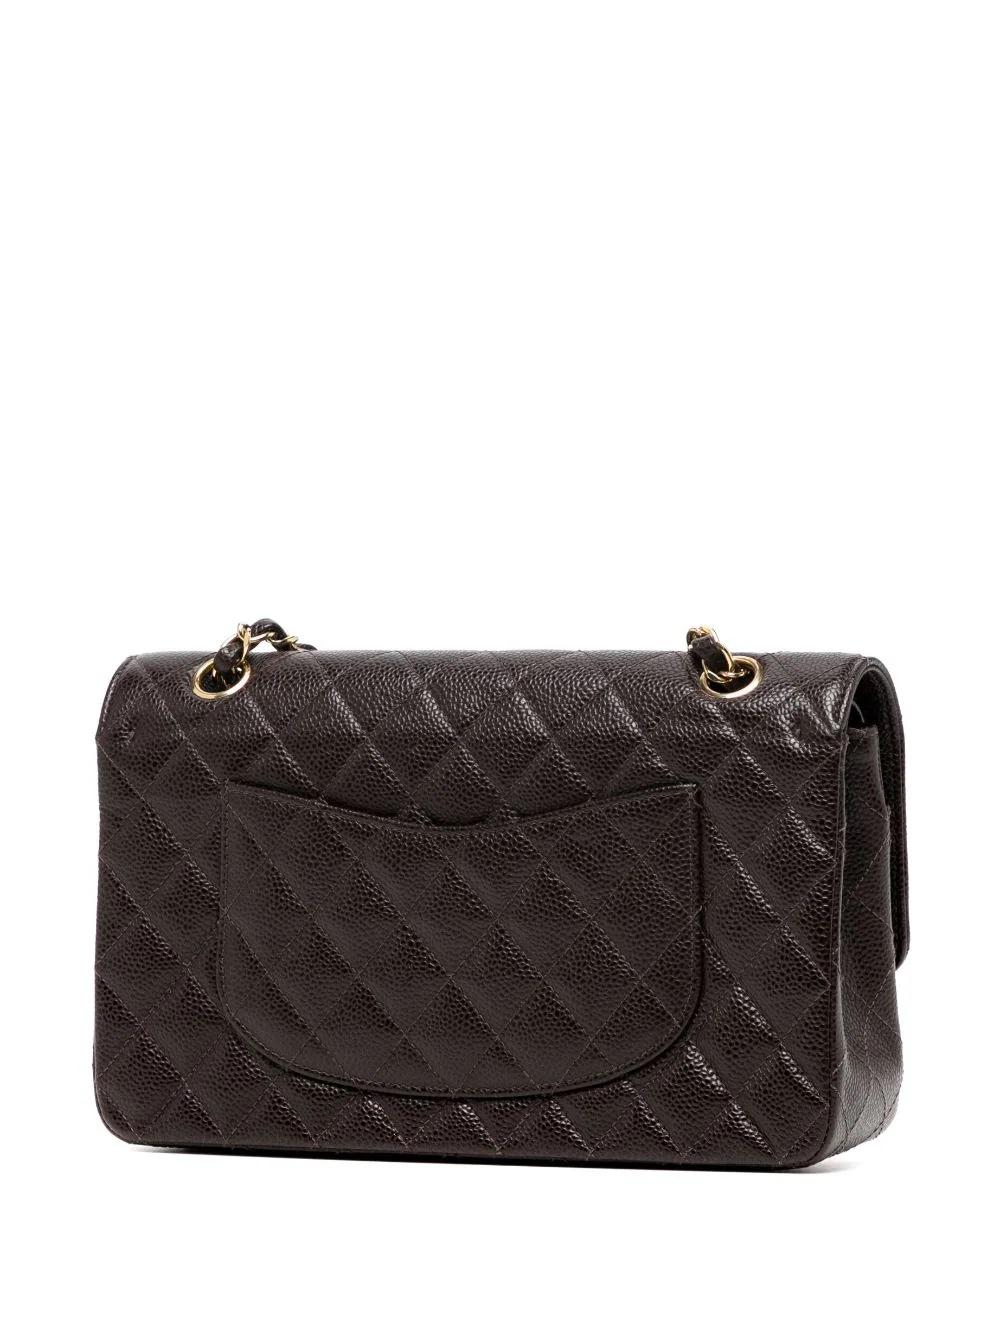 A timeless design from the Maison, CHANEL’s Double Flap shoulder bag is considered the pinnacle of sophistication. This iteration is handcrafted from diamond-quilted rare brown caviar leather and finished with refined gold-tone hardware.

* Coffee